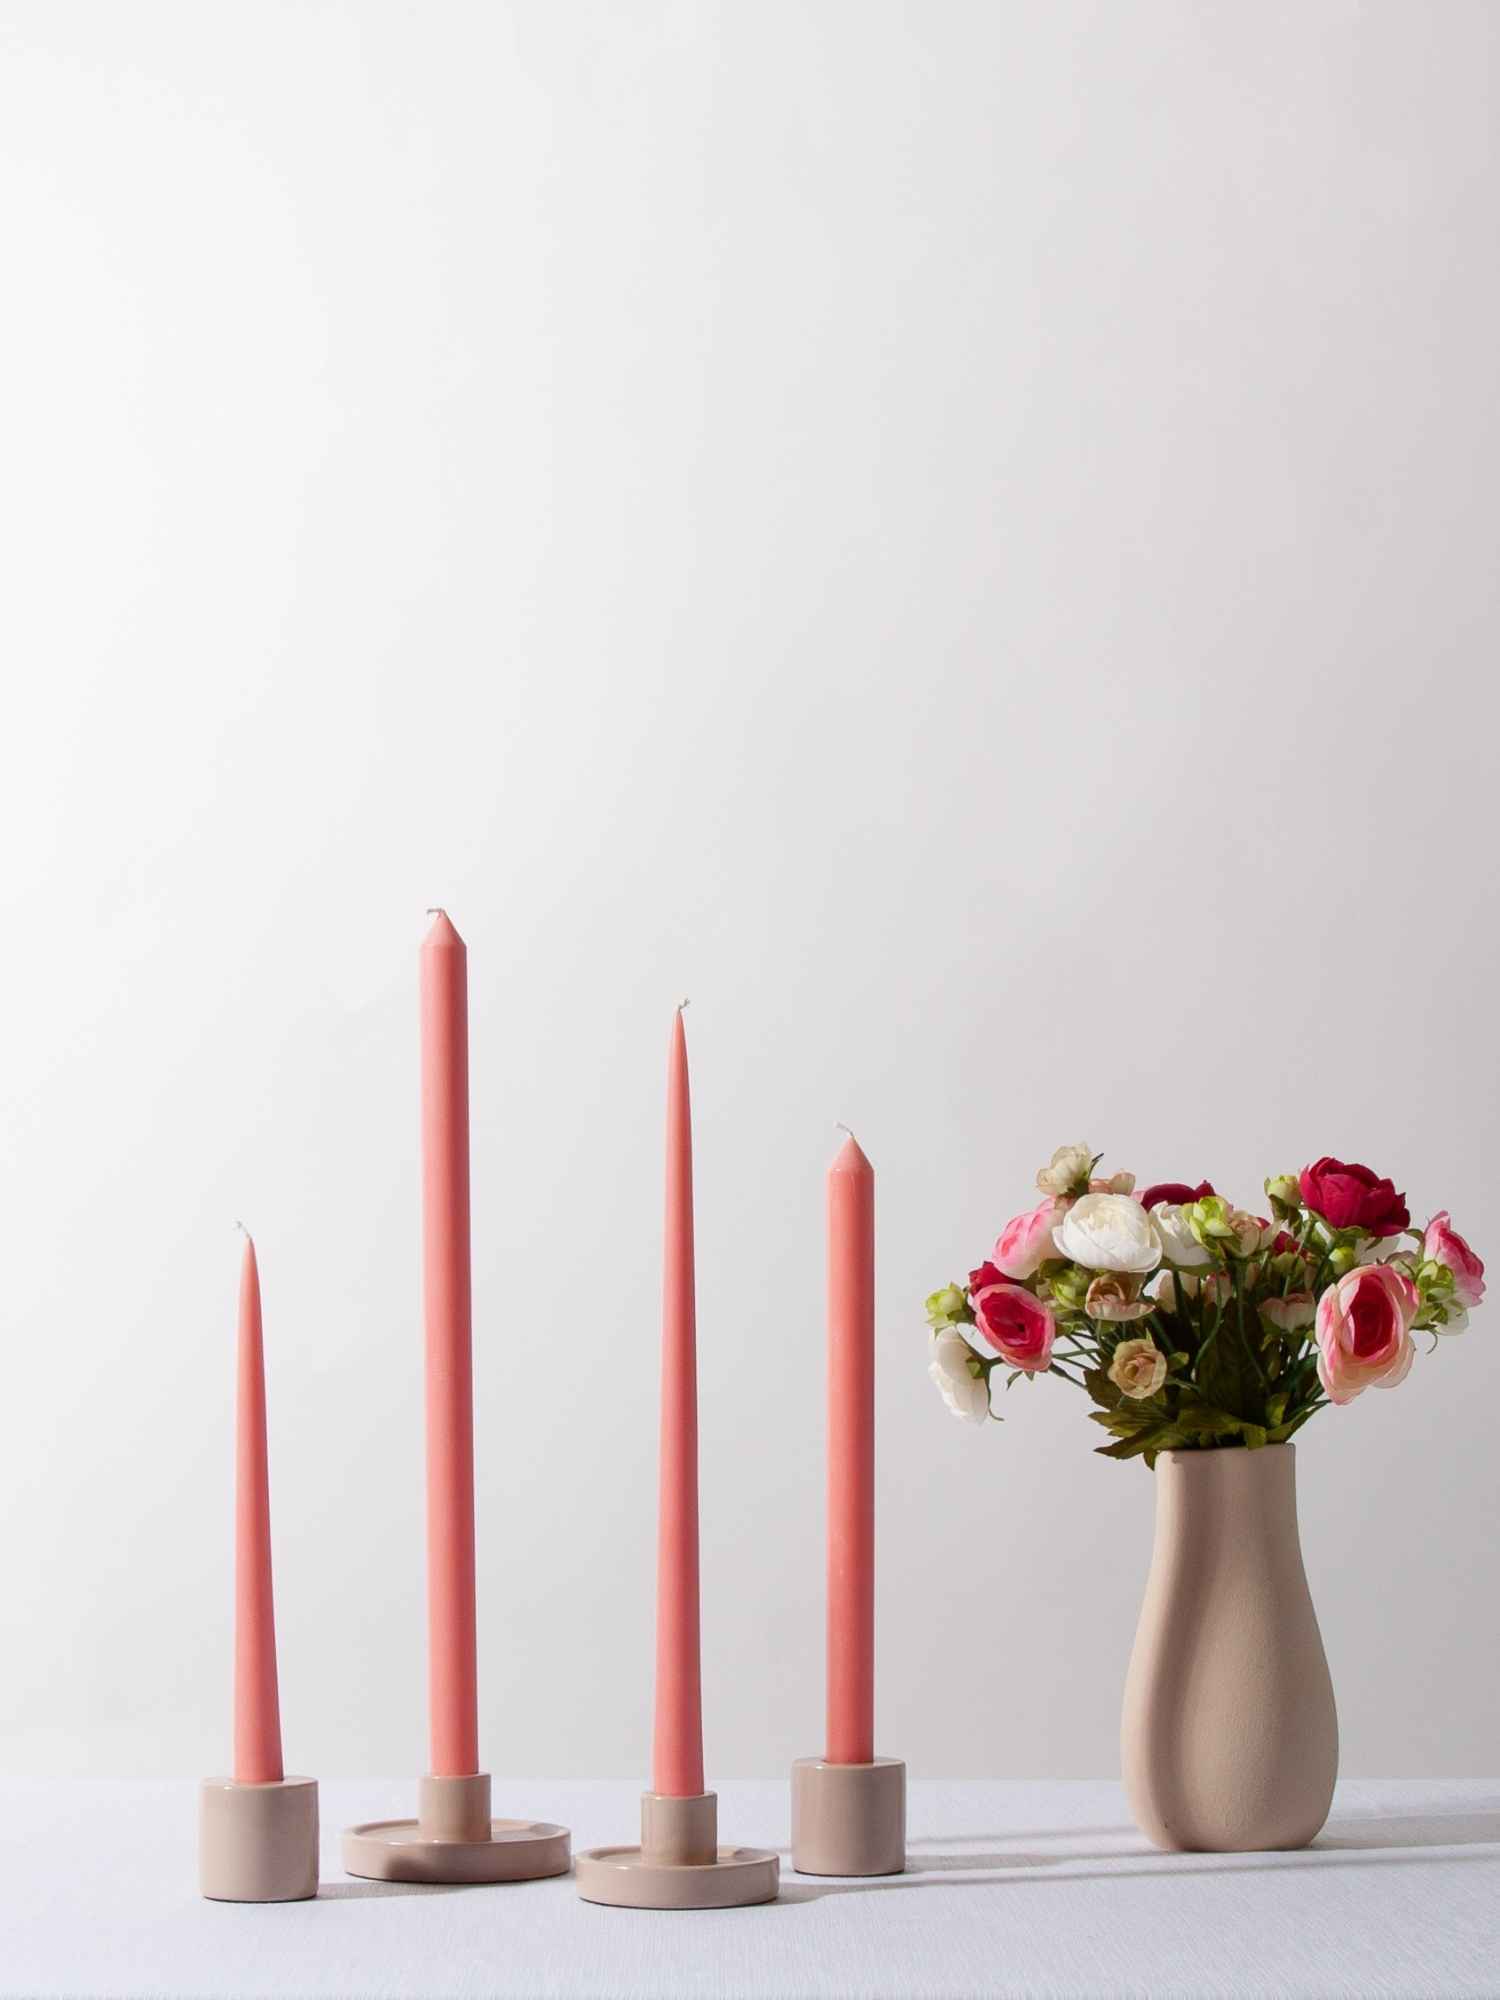 Coral Pink 30cm Dinner Candle, Pack of 4